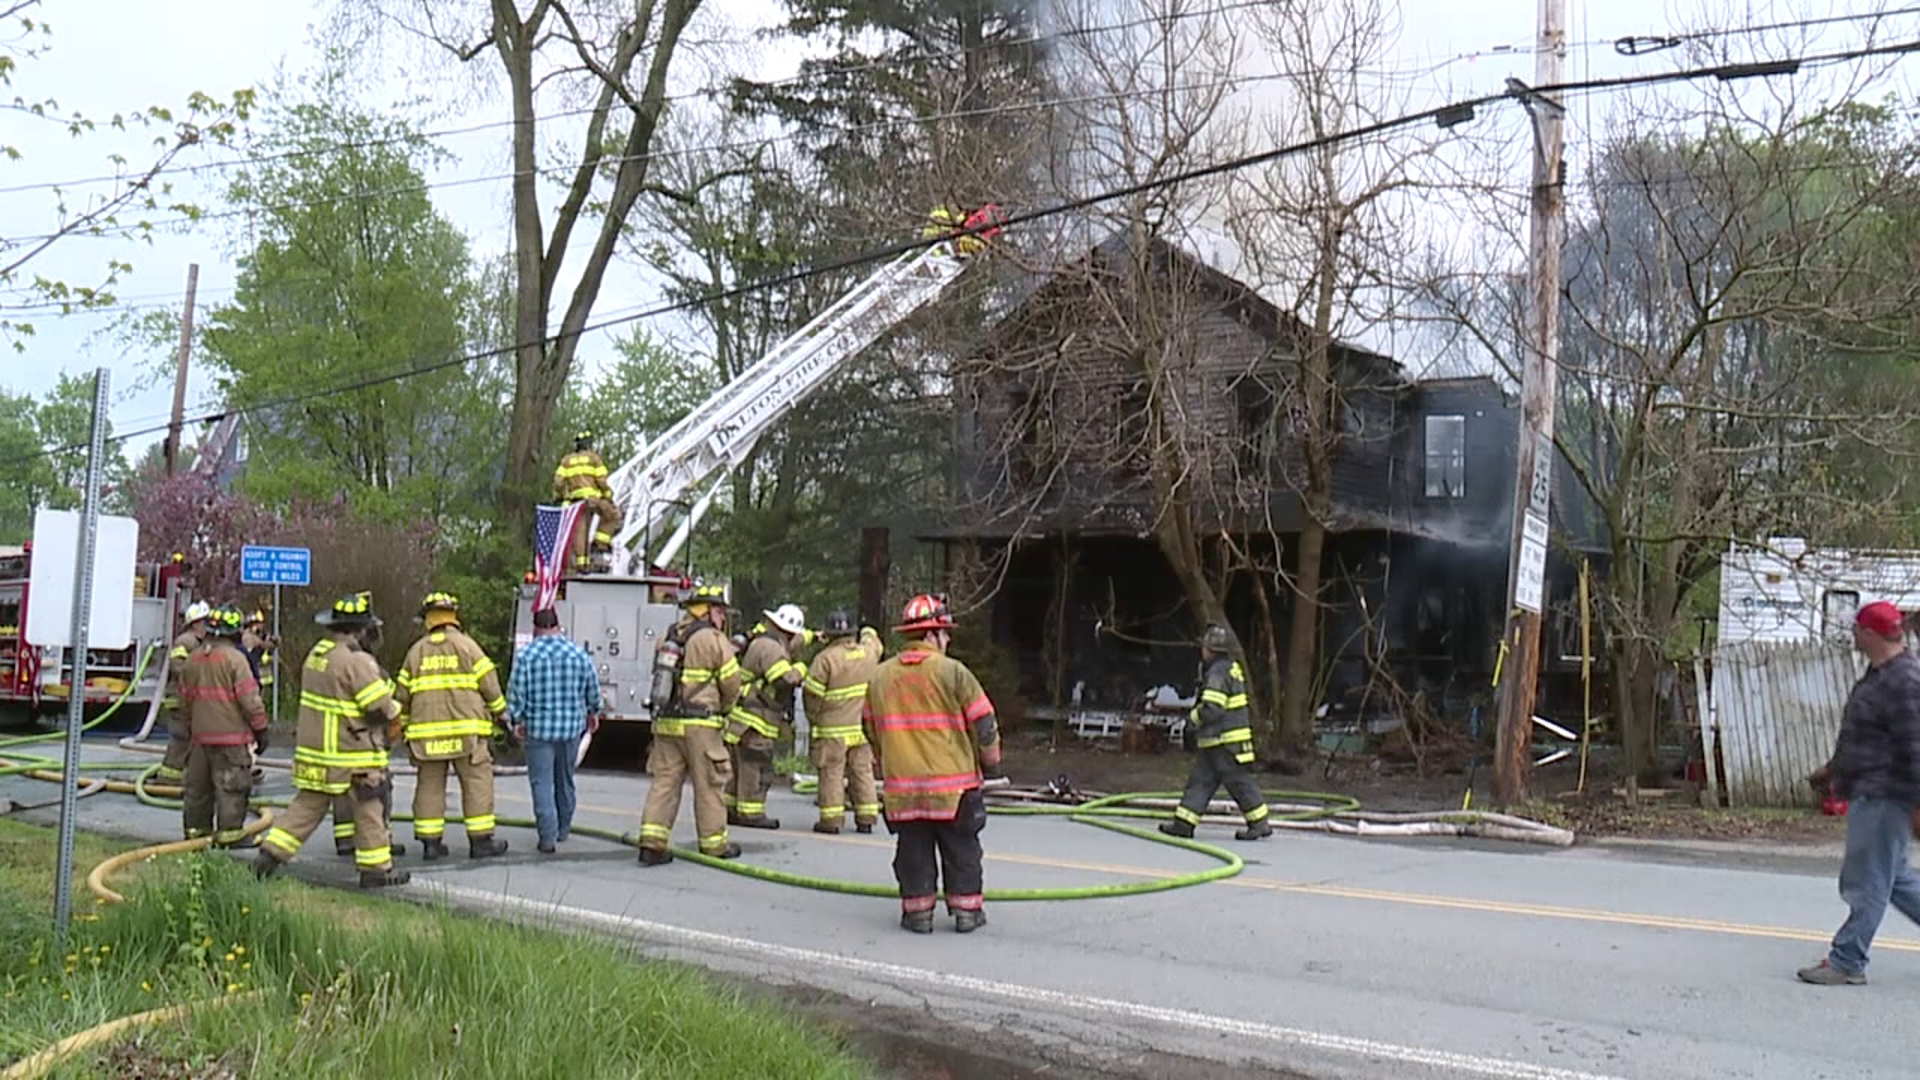 Flames sparked at a home along Route 407 in Benton Township around 1 p.m. Monday.